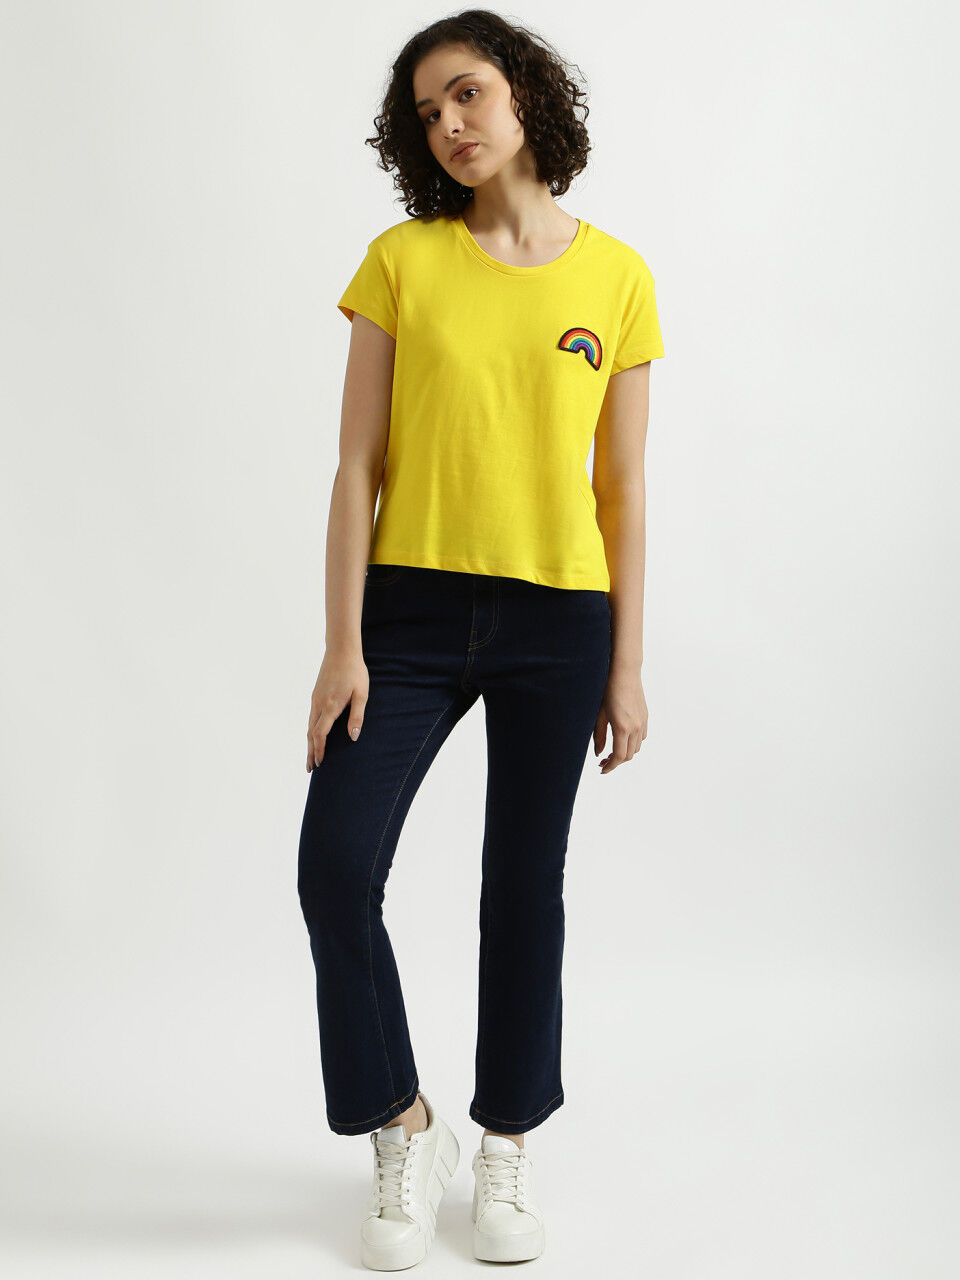 United Colors Of Benetton Yellow Embroidered Top